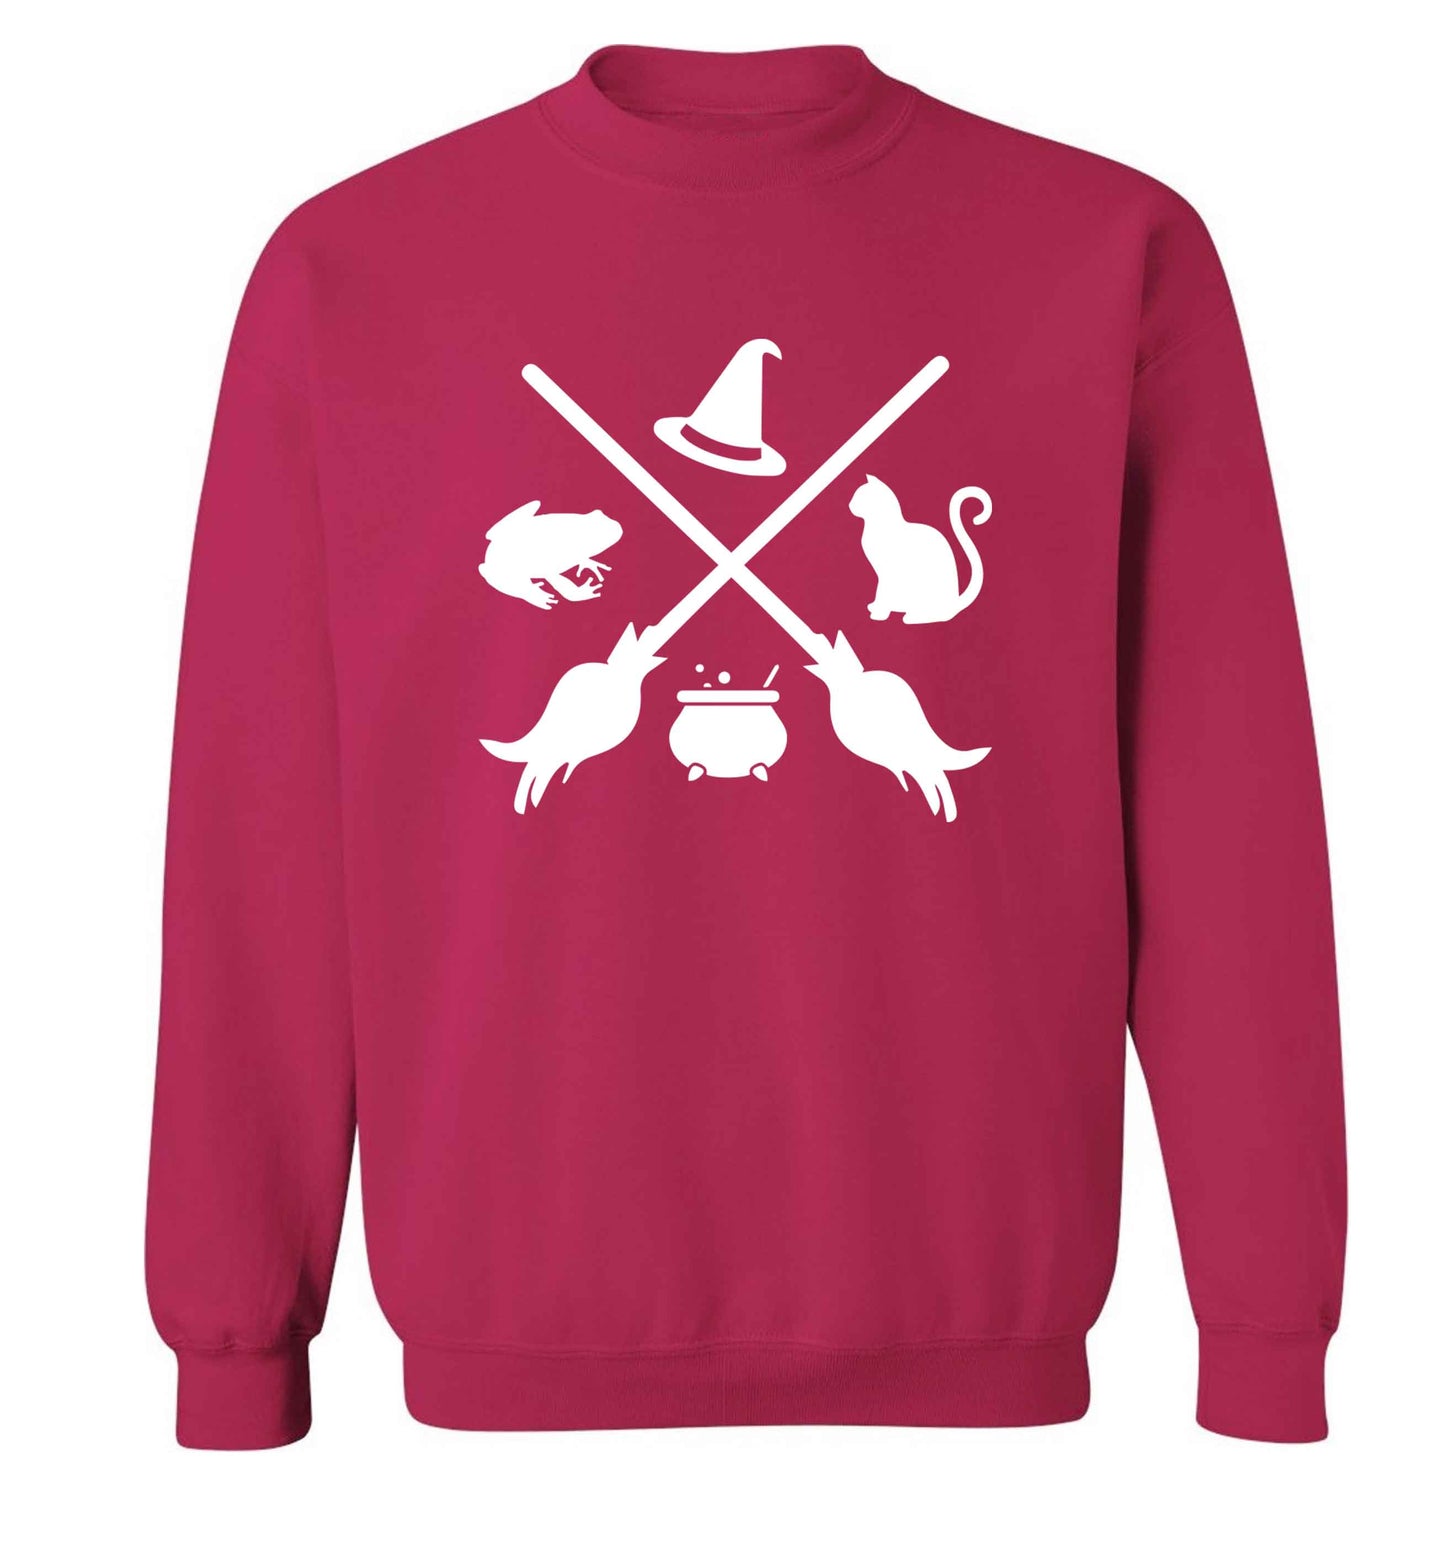 Witch symbol adult's unisex pink sweater 2XL